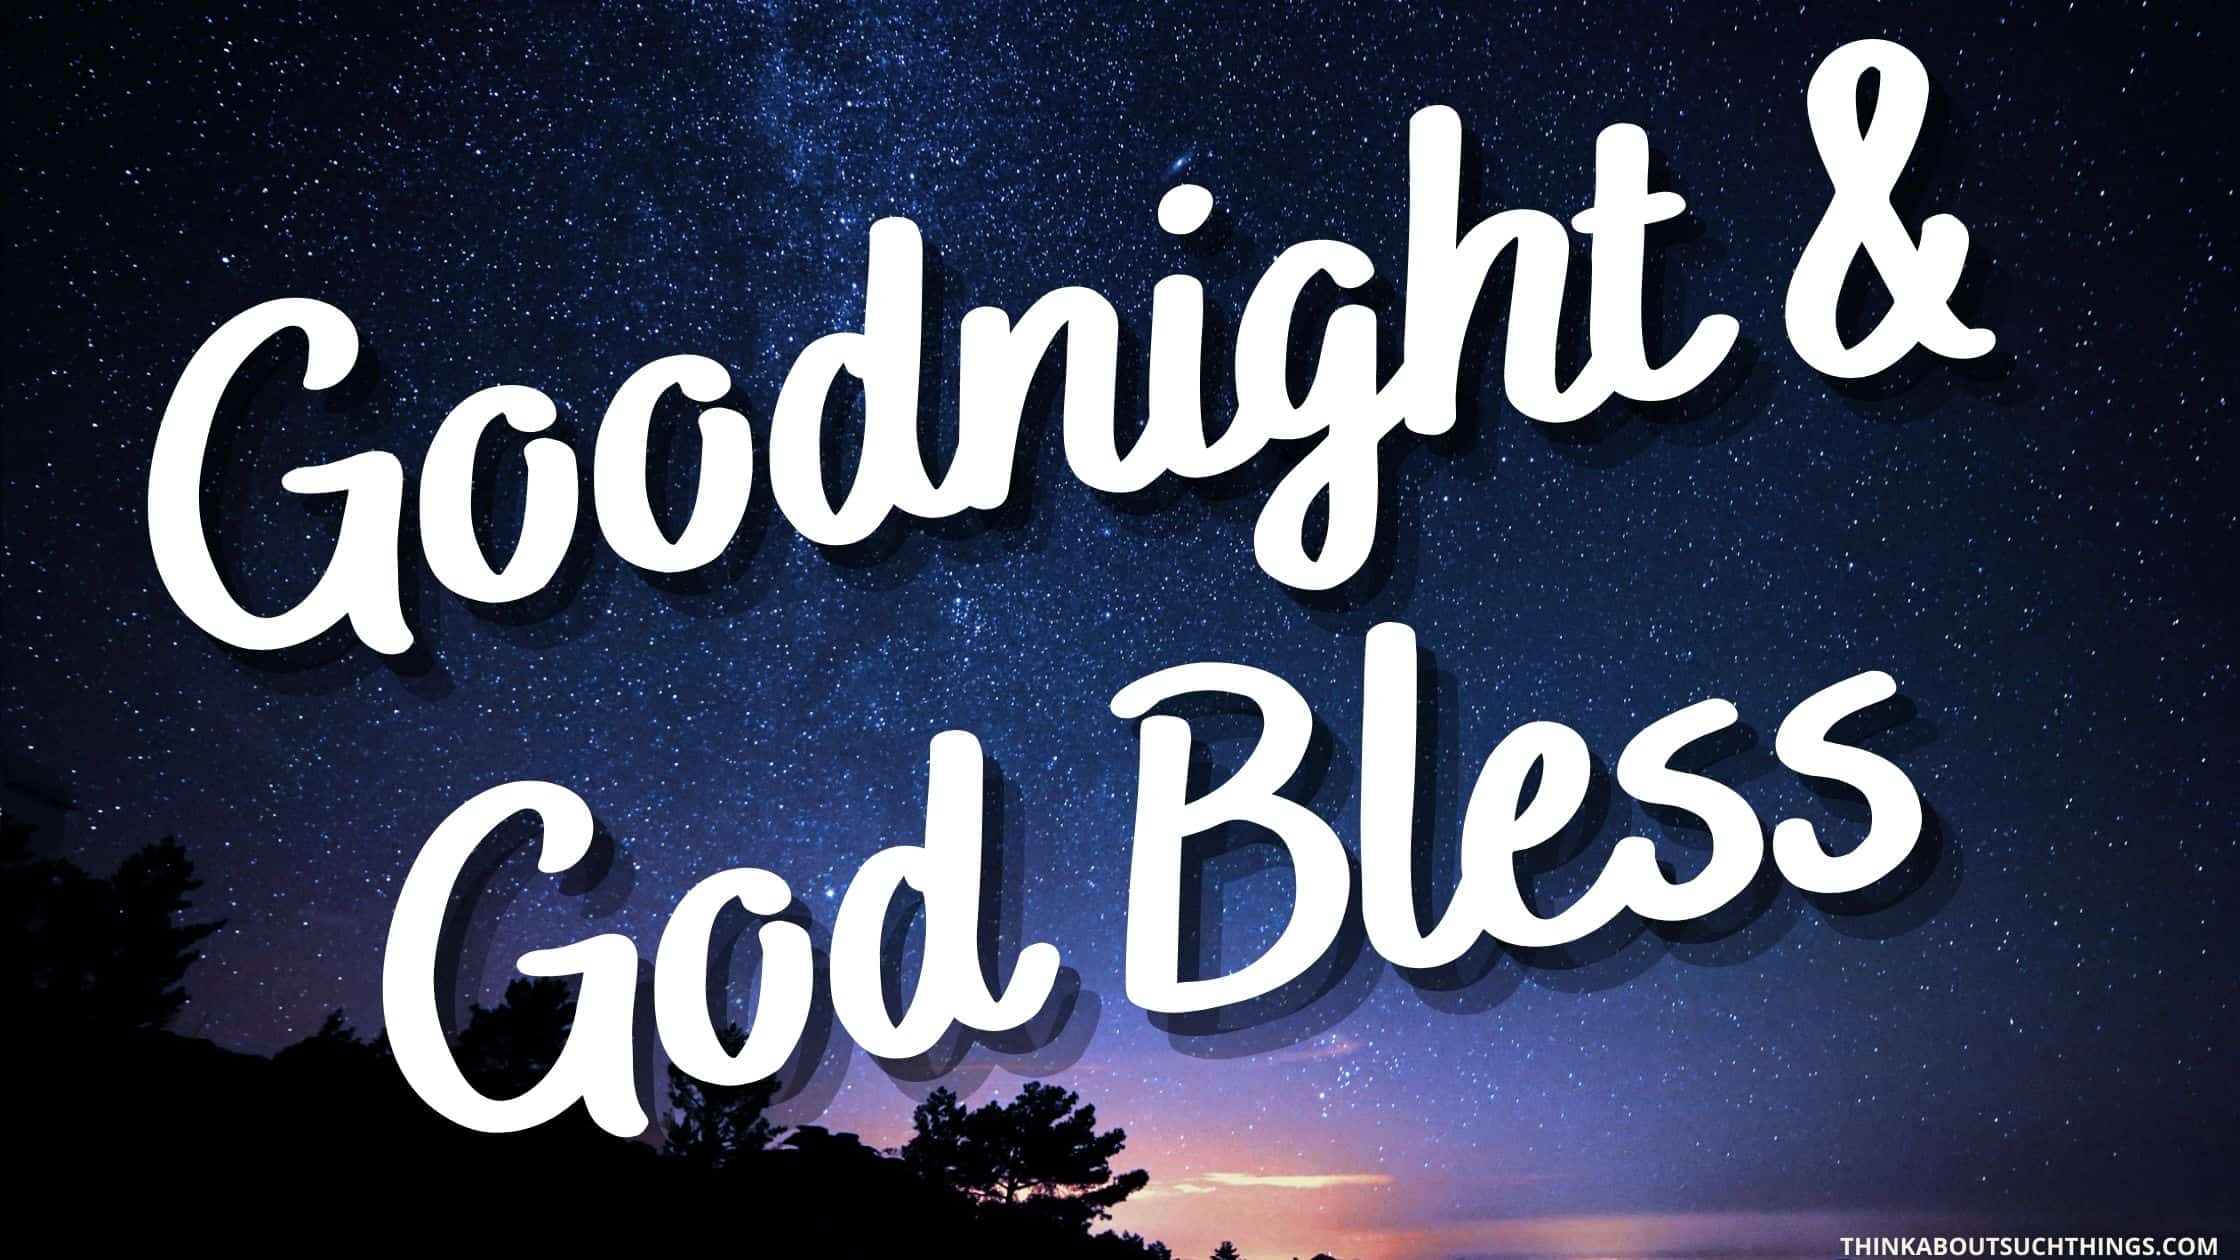 God Bless with Good Night Images: Sleep Peacefully Tonight!